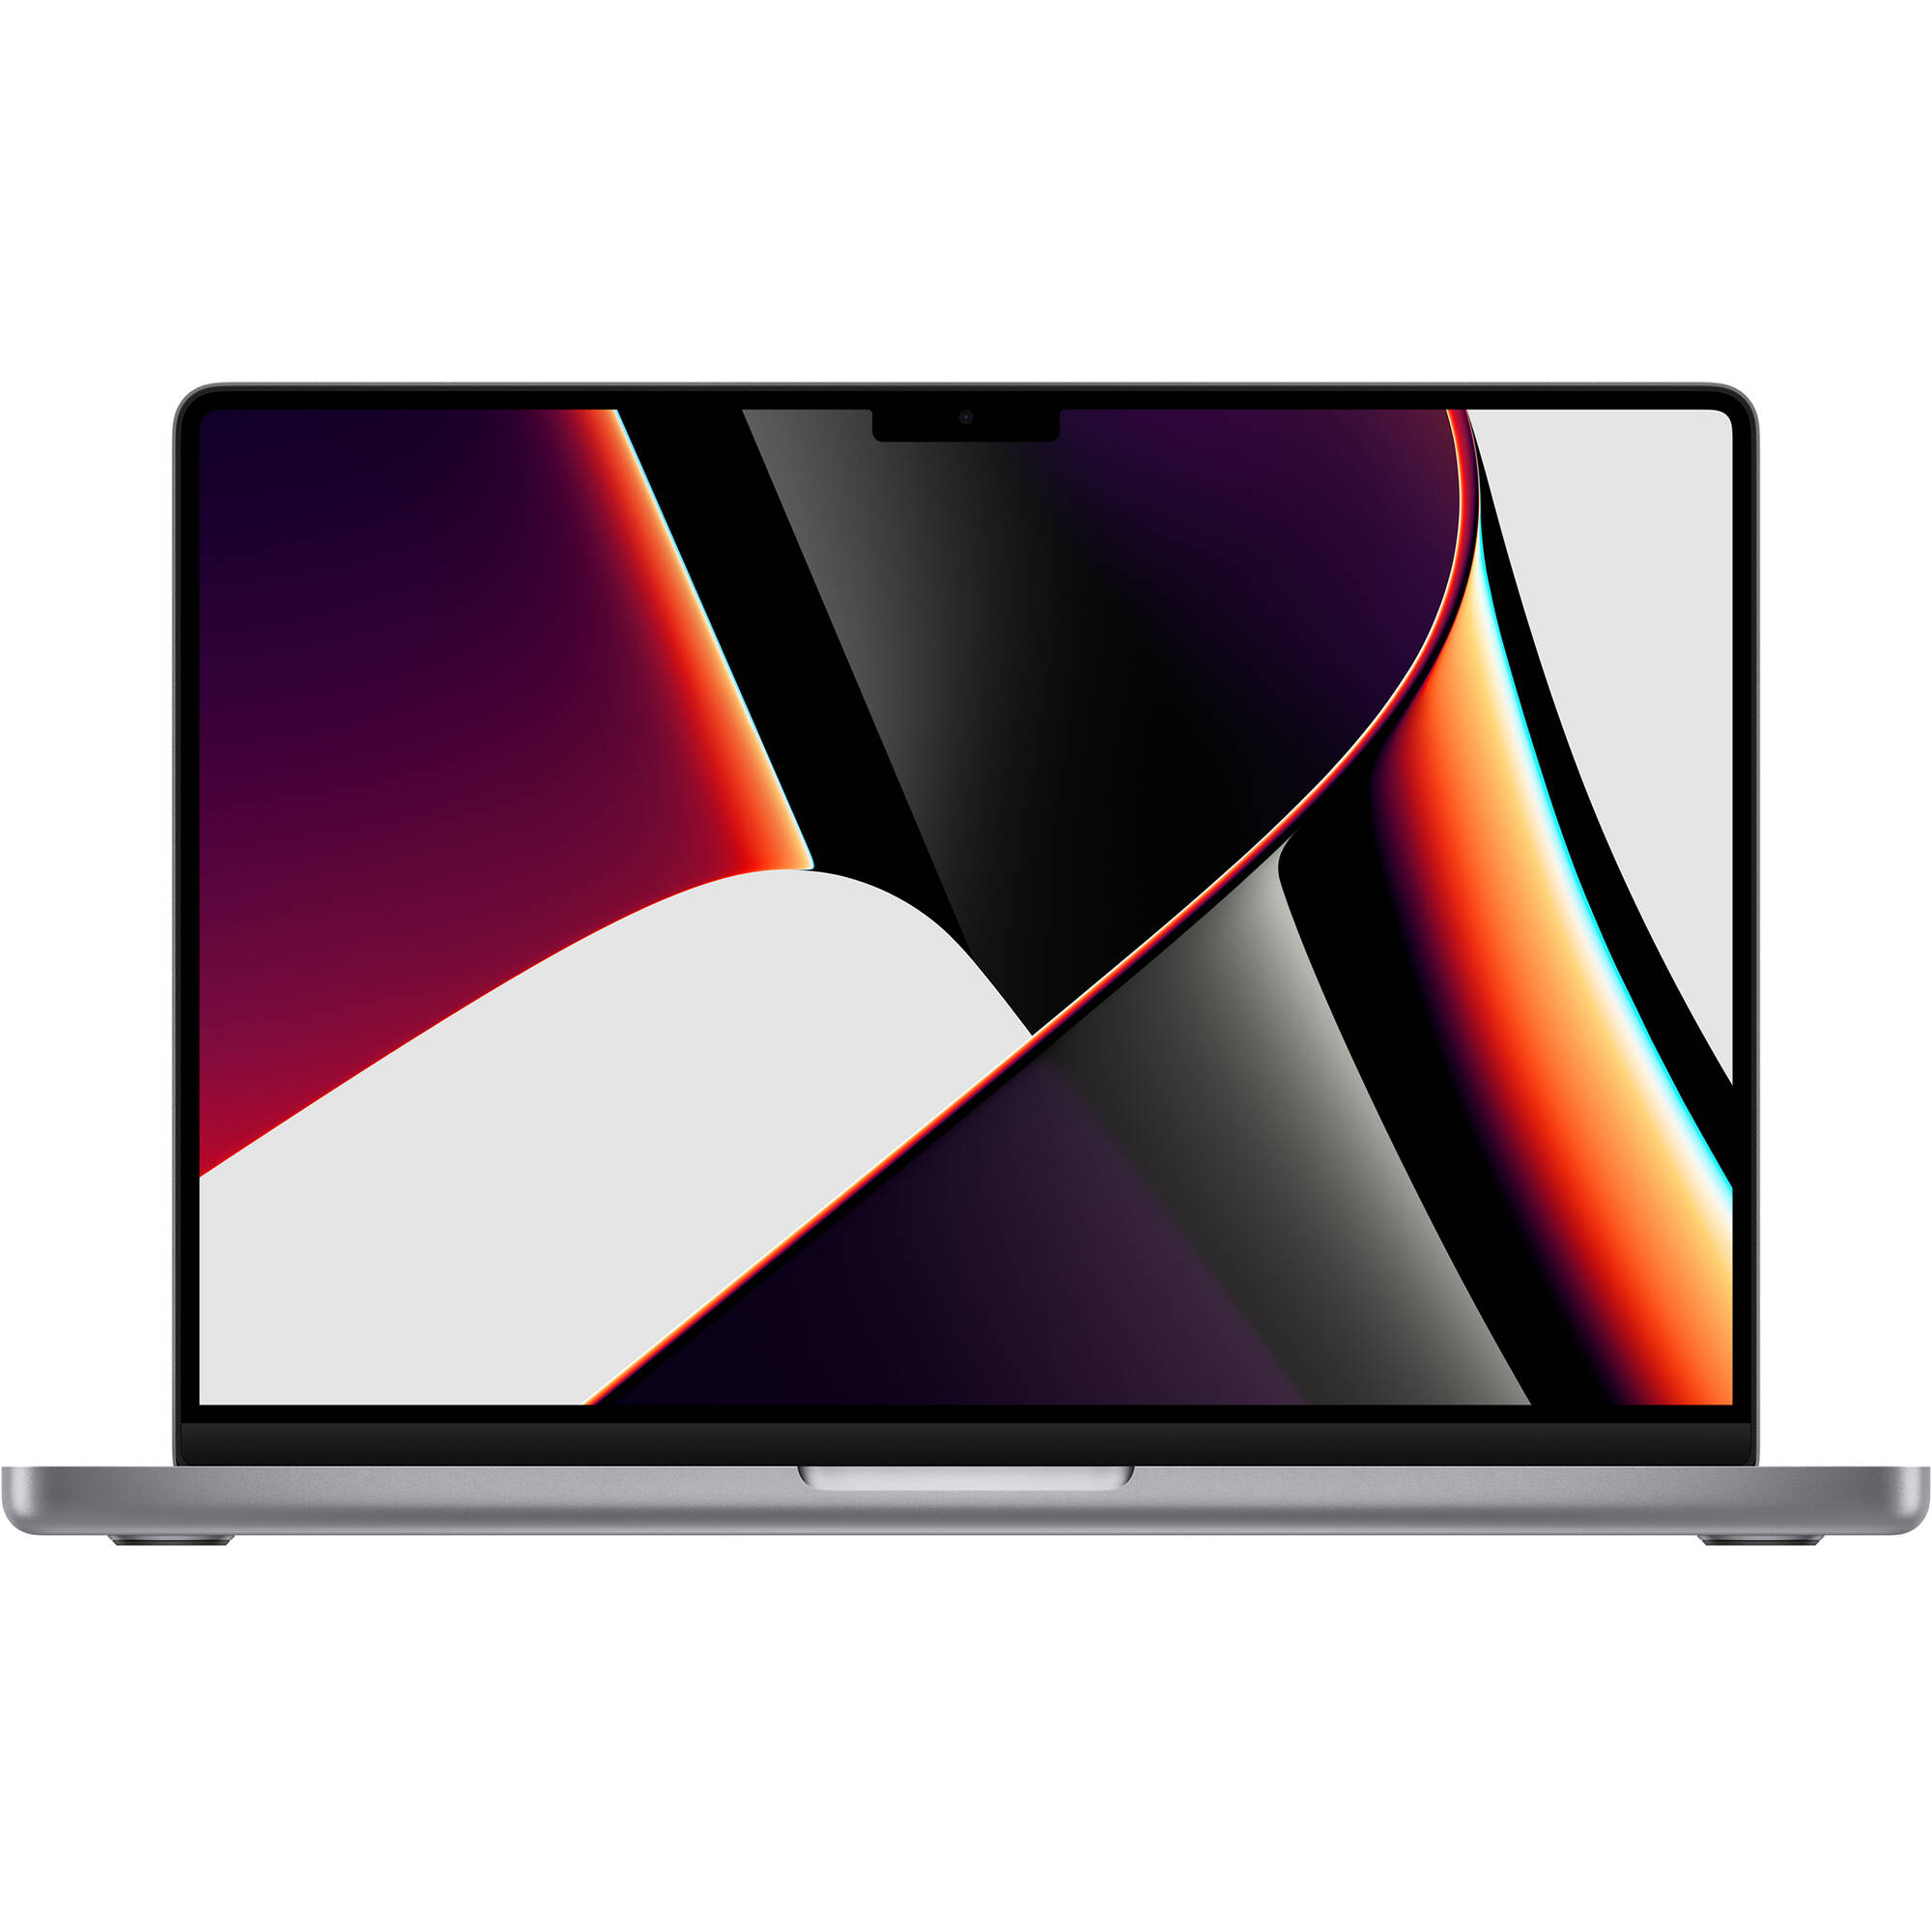 Apple MacBook Pro con M1 Max Chip 14.2" Late 2021 Space Gray (Gris)